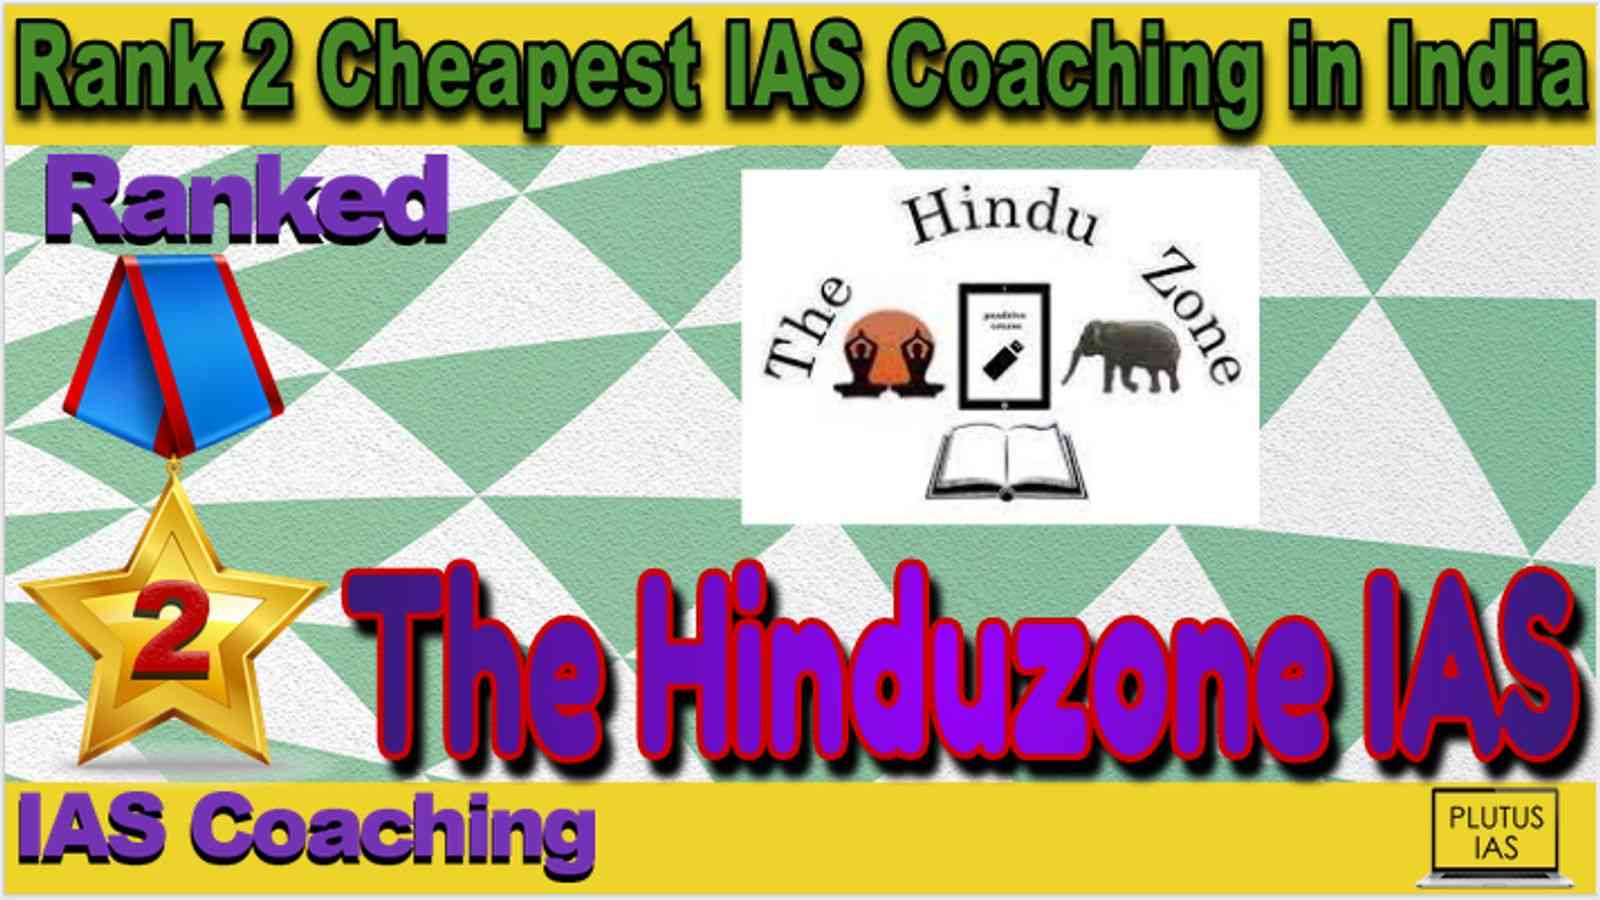 Rank 2 Cheapest IAS Coaching in India